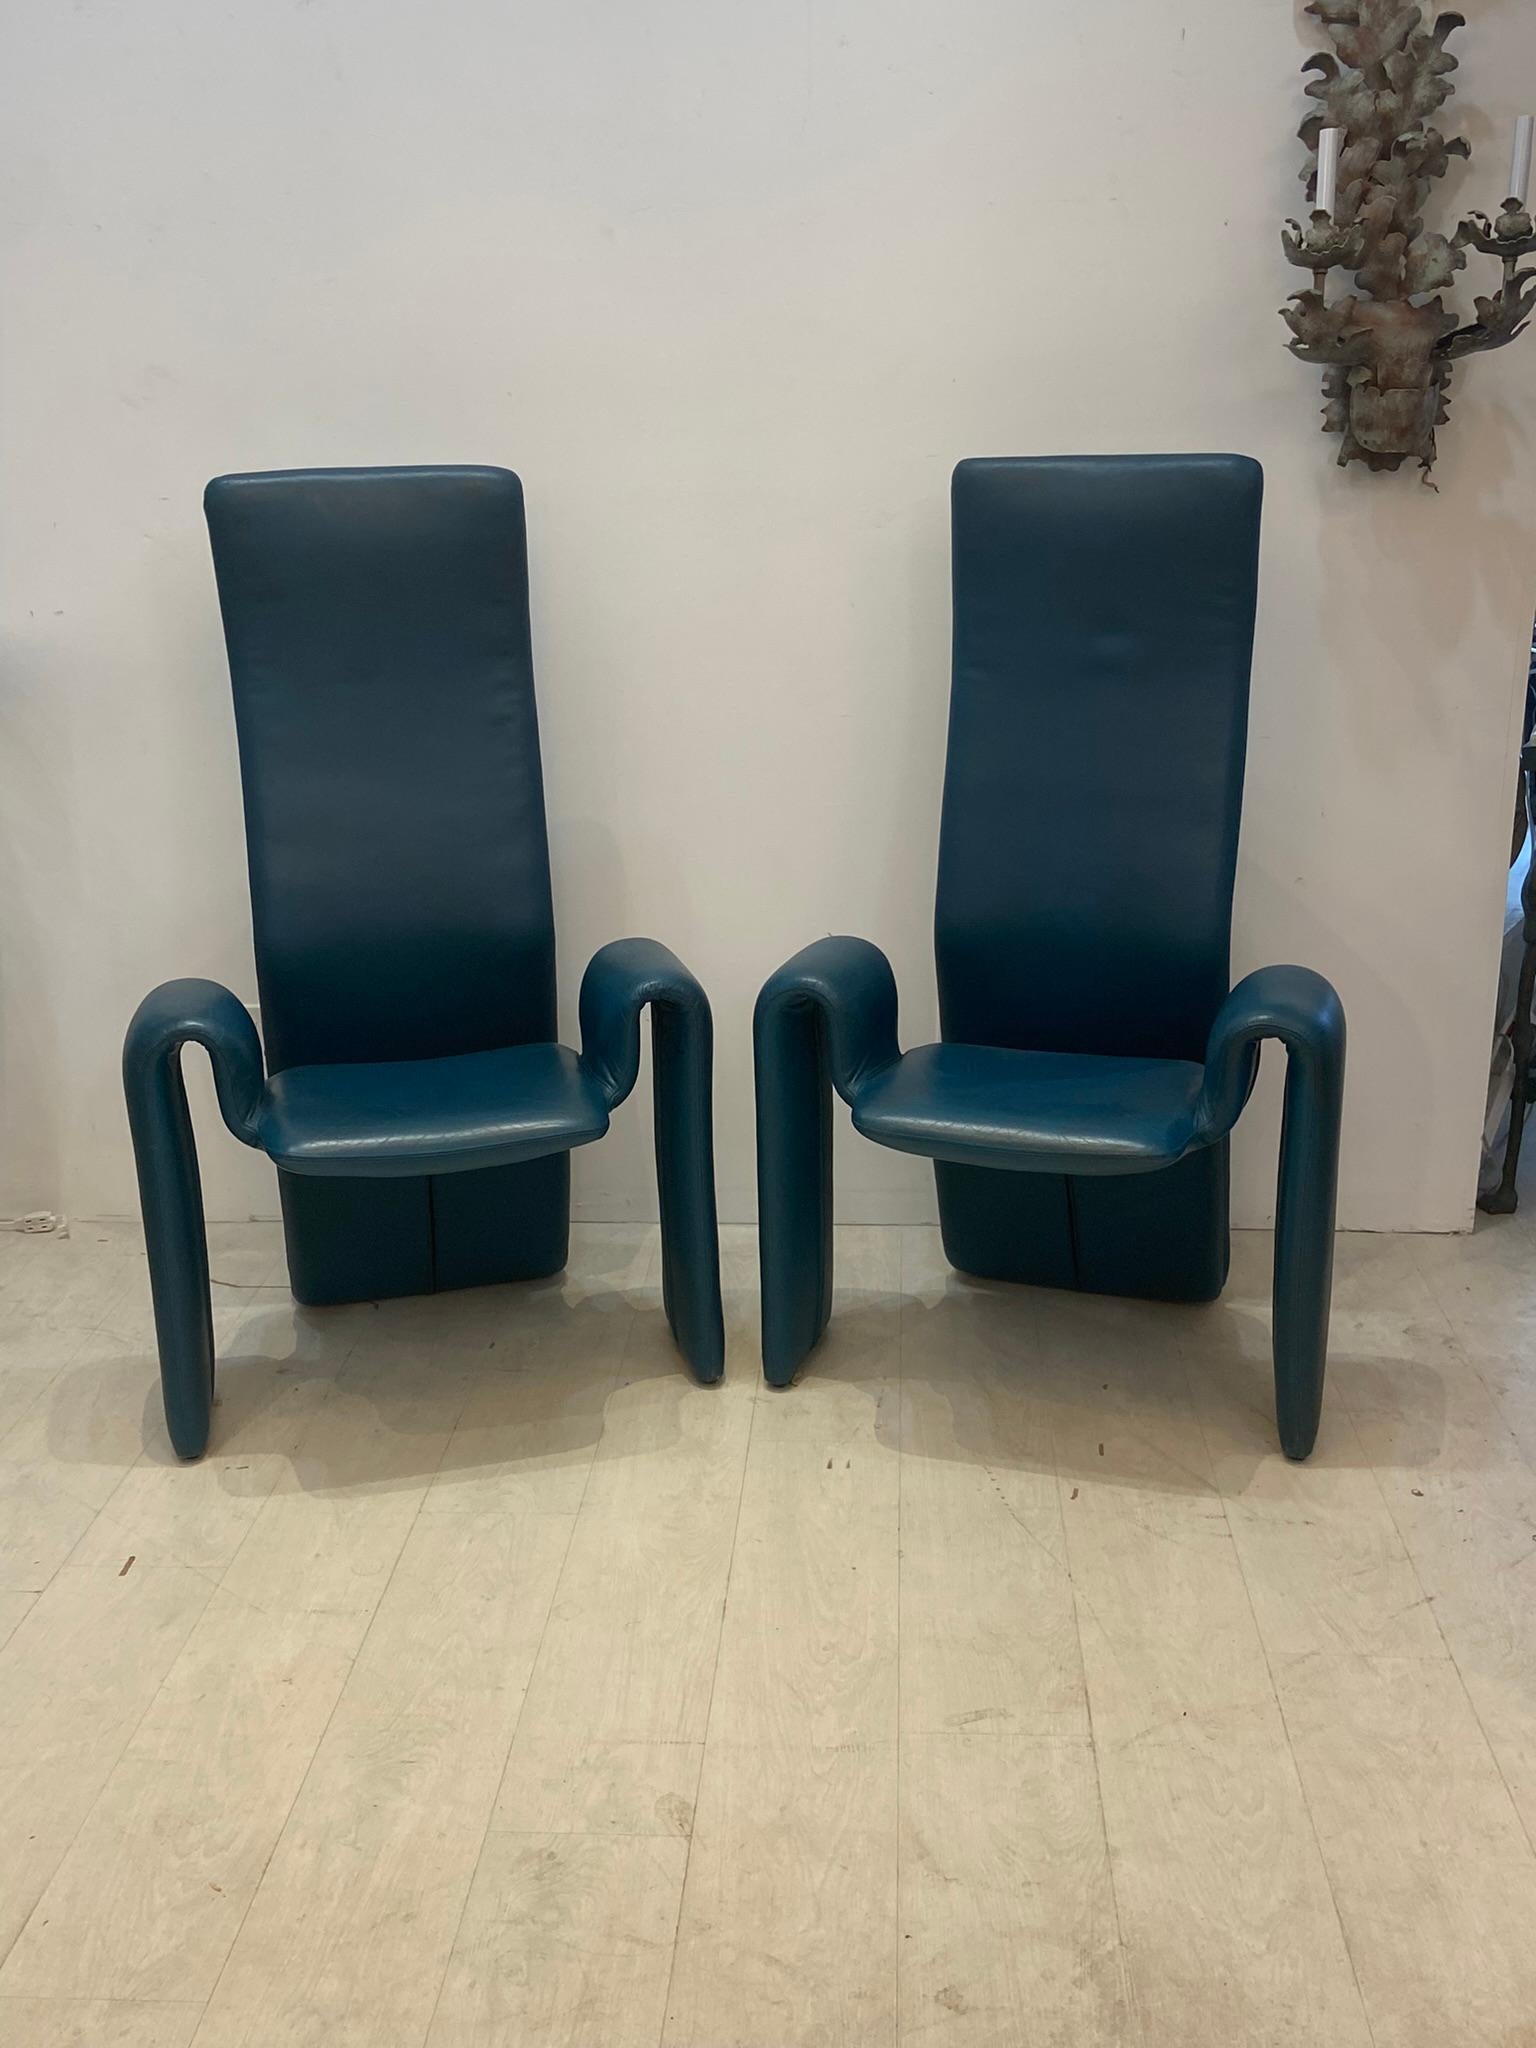 Pair of dining room arm chairs could be used as lounge chairs or side chairs. These chairs were designed by Steve Leonard for Brayton International in the 1970s. In very good condition show very little wear from a well kept estate.